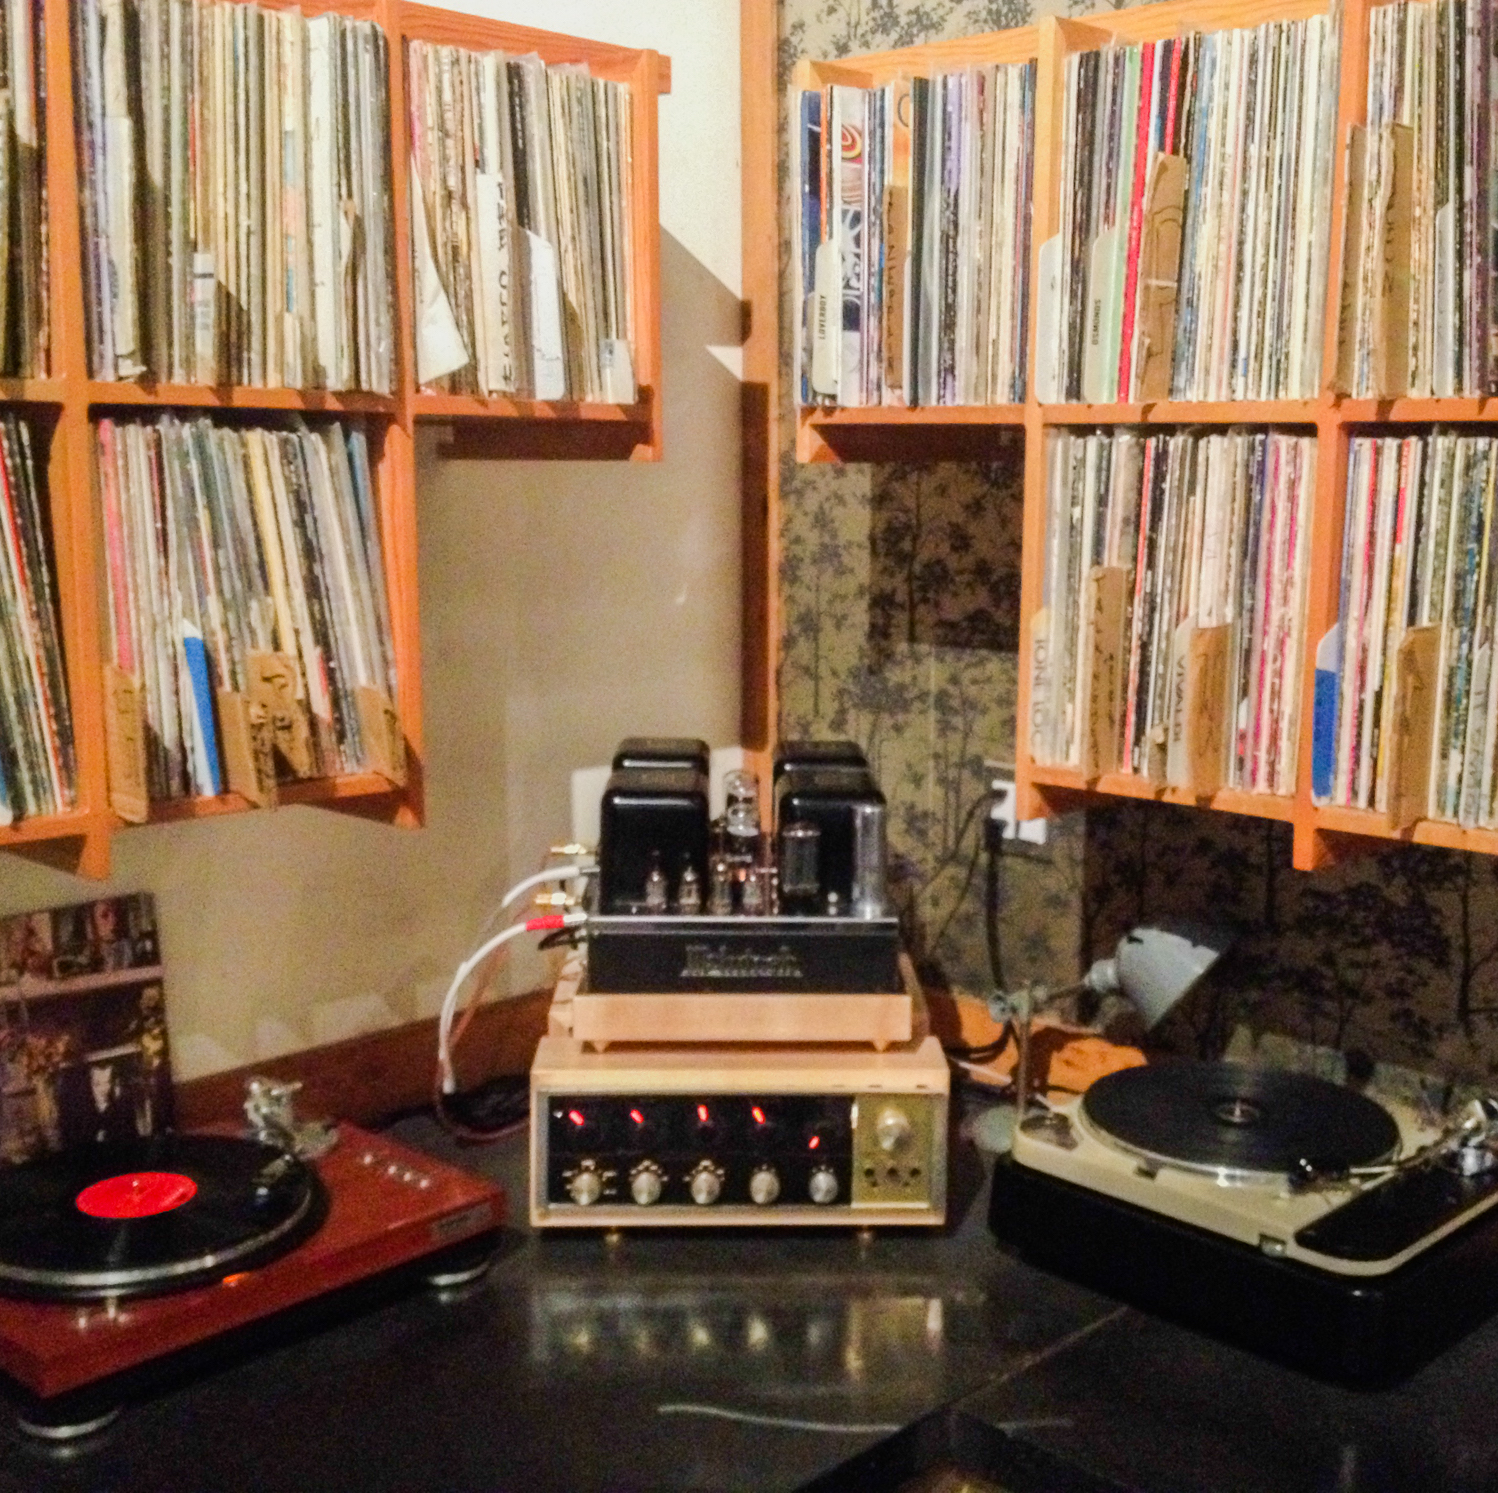 Here Is A Short List Of Record Players To Satisfy Your Home Listening Needs